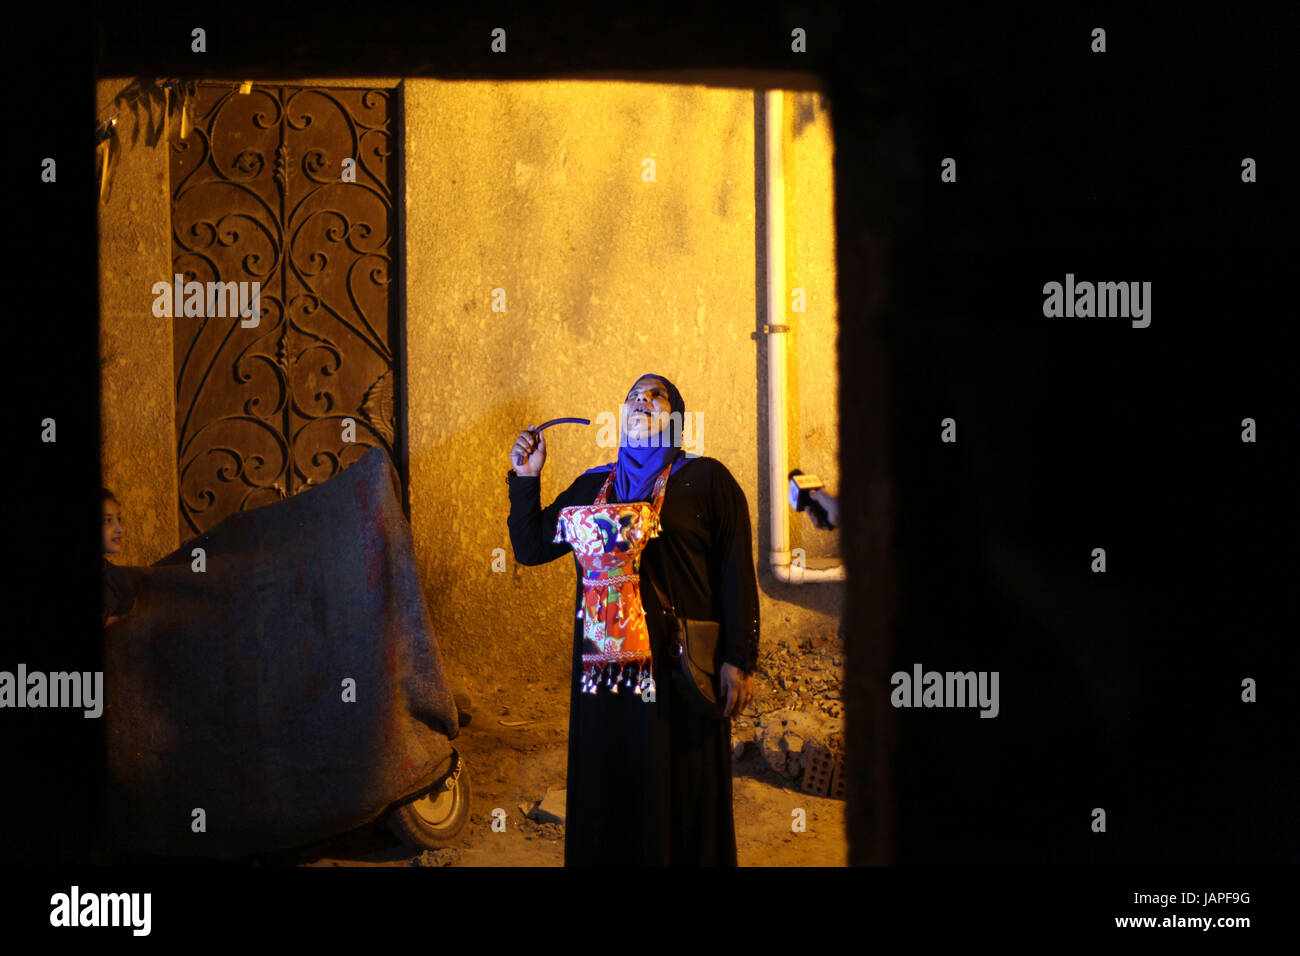 (170607) -- CAIRO, June 7, 2017 (Xinhua) -- Dalal Abdul Qader sings traditional religious song to awaken people for the pre-dawn suhoor meal before starting their daylong fast in Maadi district of Cairo, Egypt, on June 6, 2017. This tradition dates back to the Fatimid Caliphate nine centuries ago, when the Musaharati, or Ramadan drummer, was the only means to awaken people for sohoor since there were no alarm clocks or loudspeakers in mosques at that time. For Abdul Qader, the job of Musaharati is not only a way to earn a living, but it is also a revival of an old tradition that brings up love Stock Photo